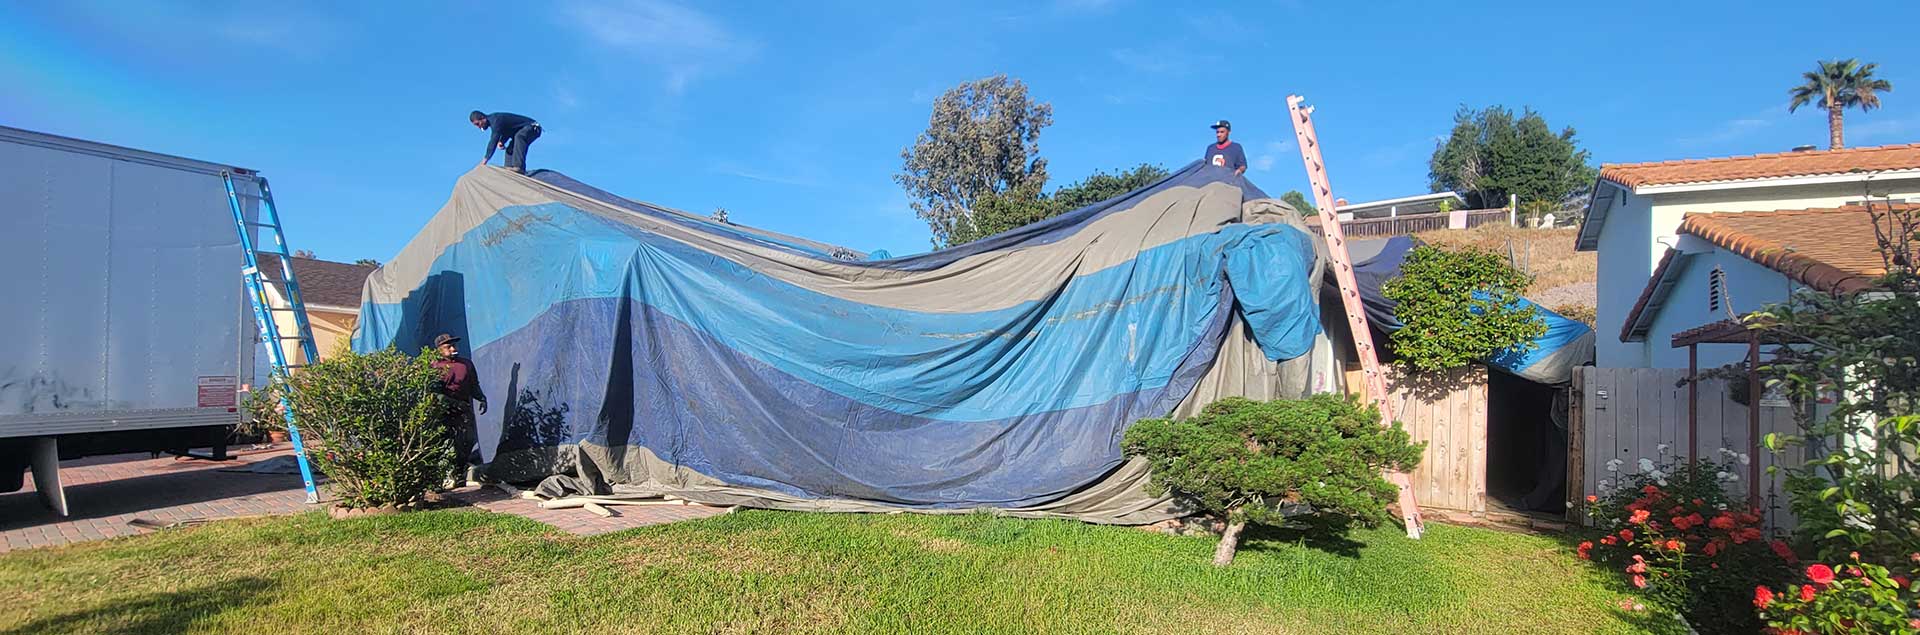 How much do fumigations / tenting cost?